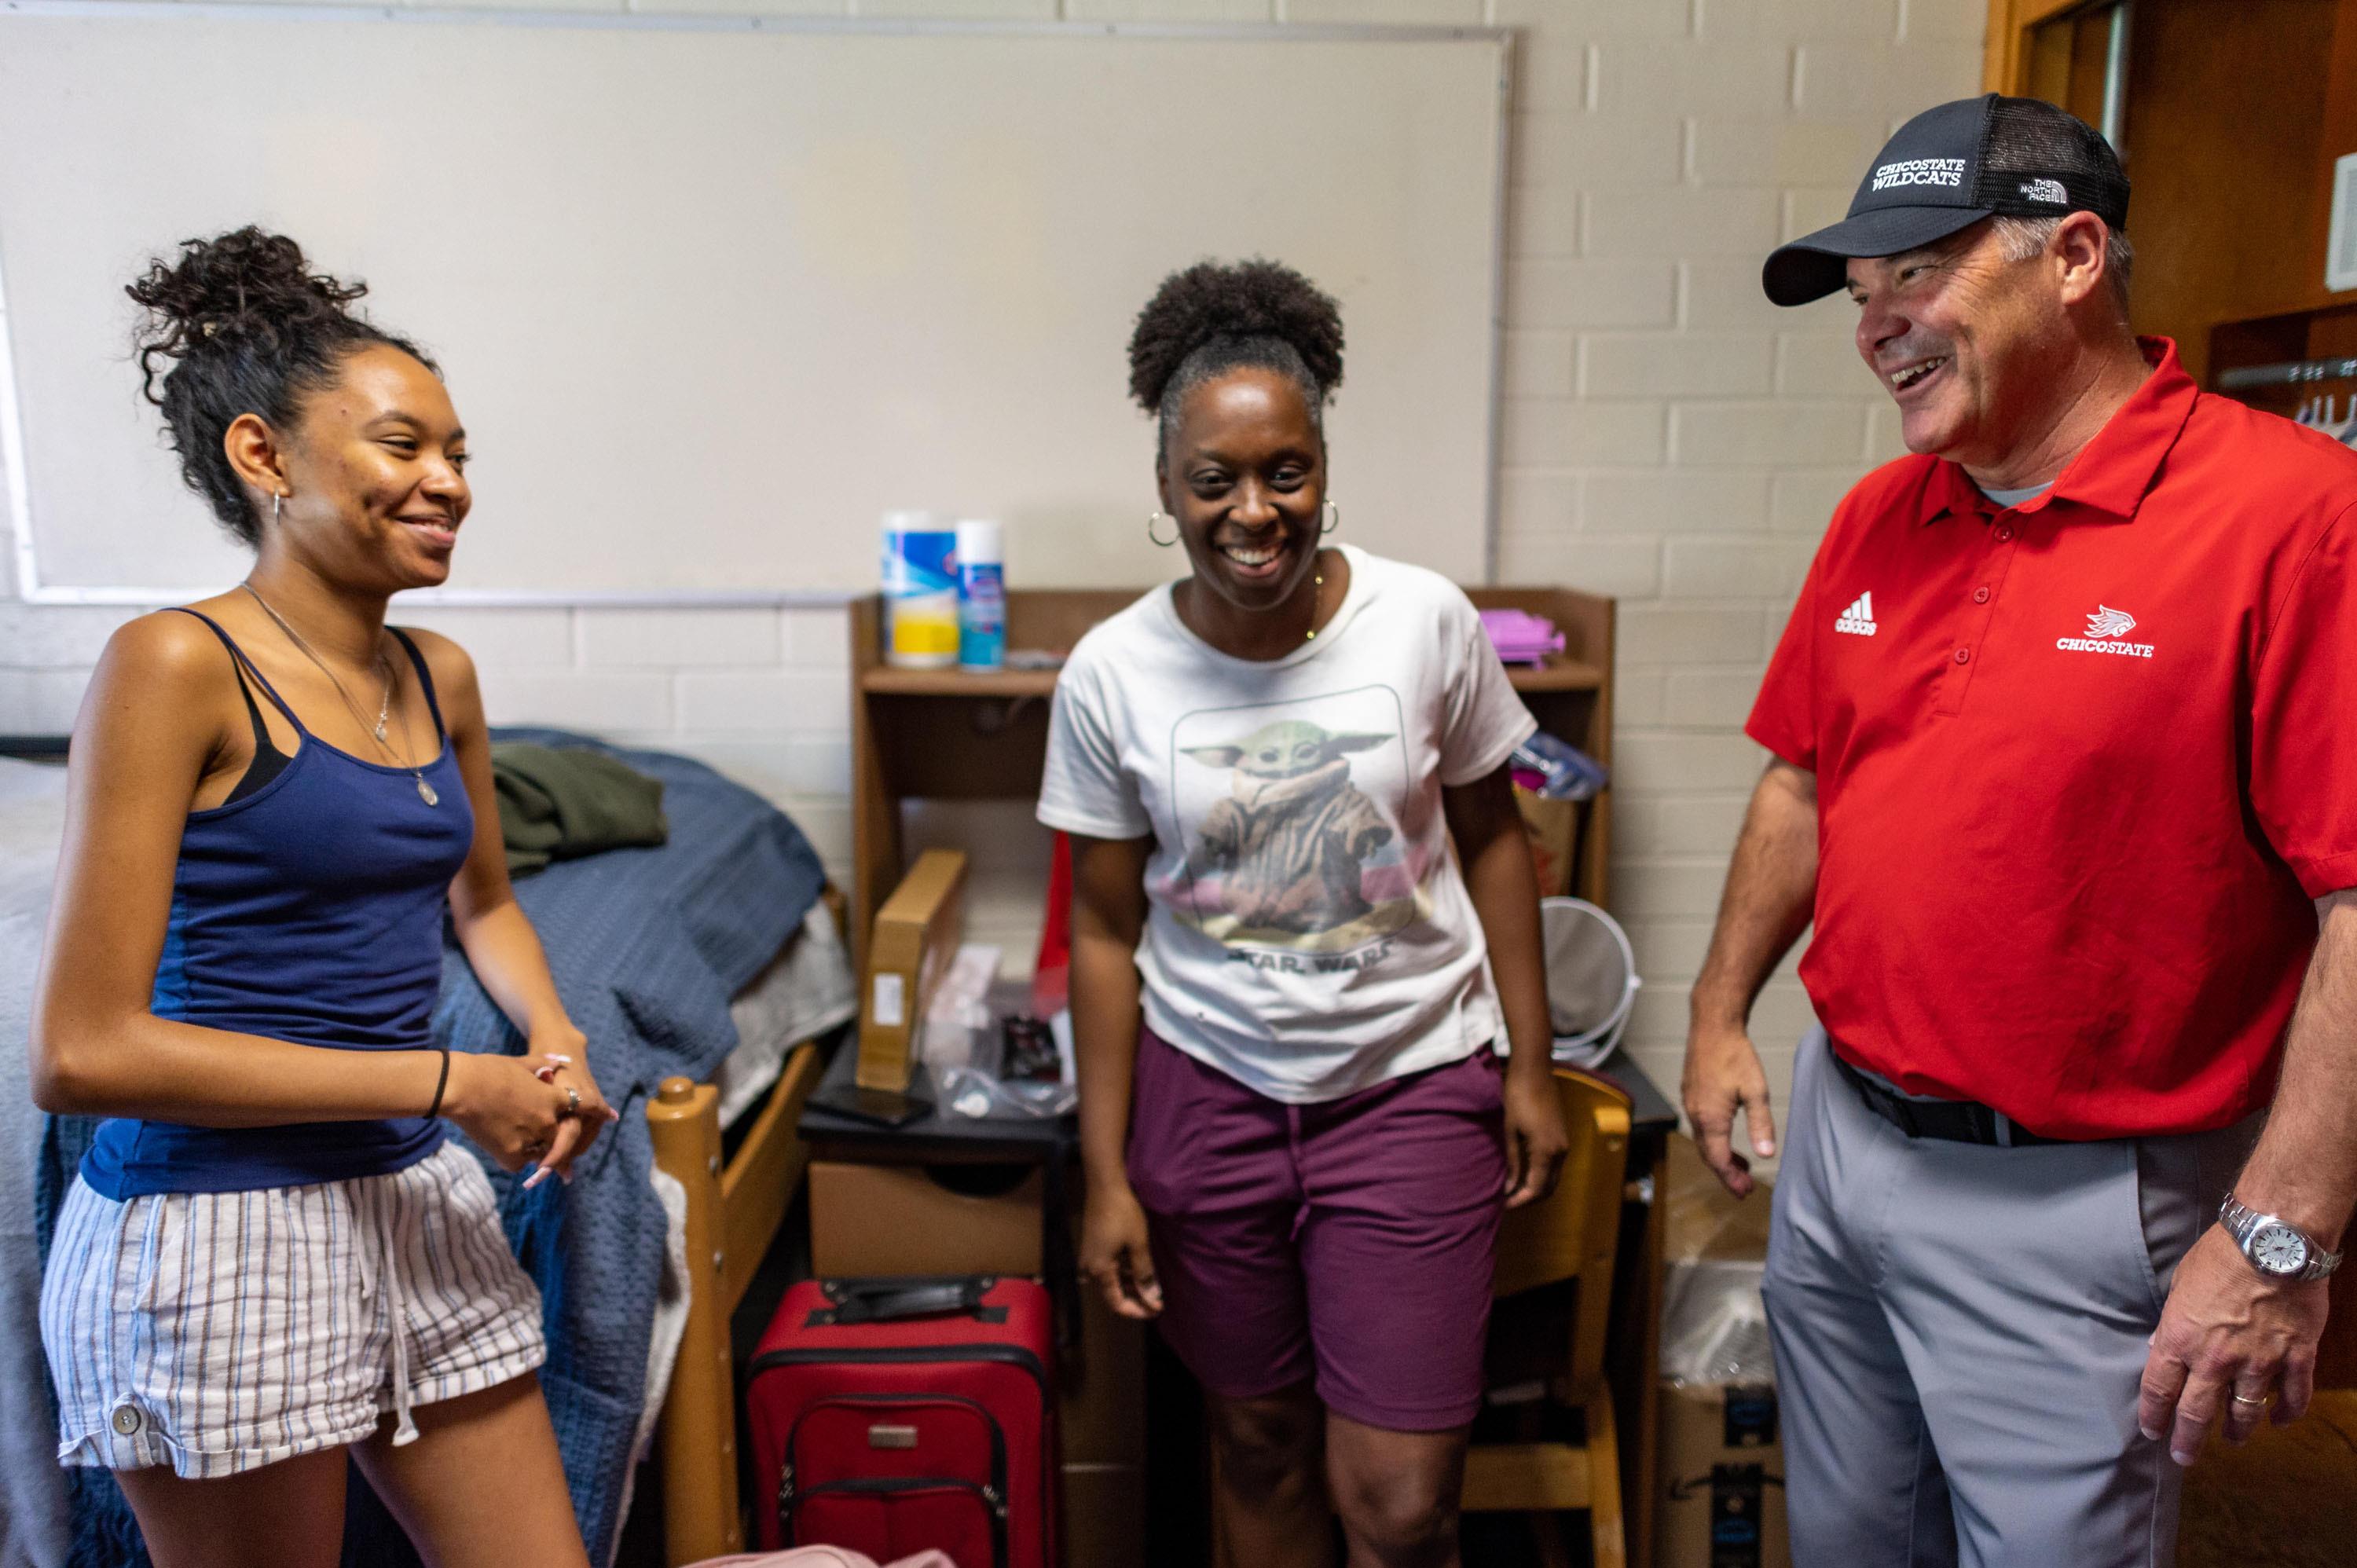 Mother, daughter and President perez sharing a laugh in the dorm room